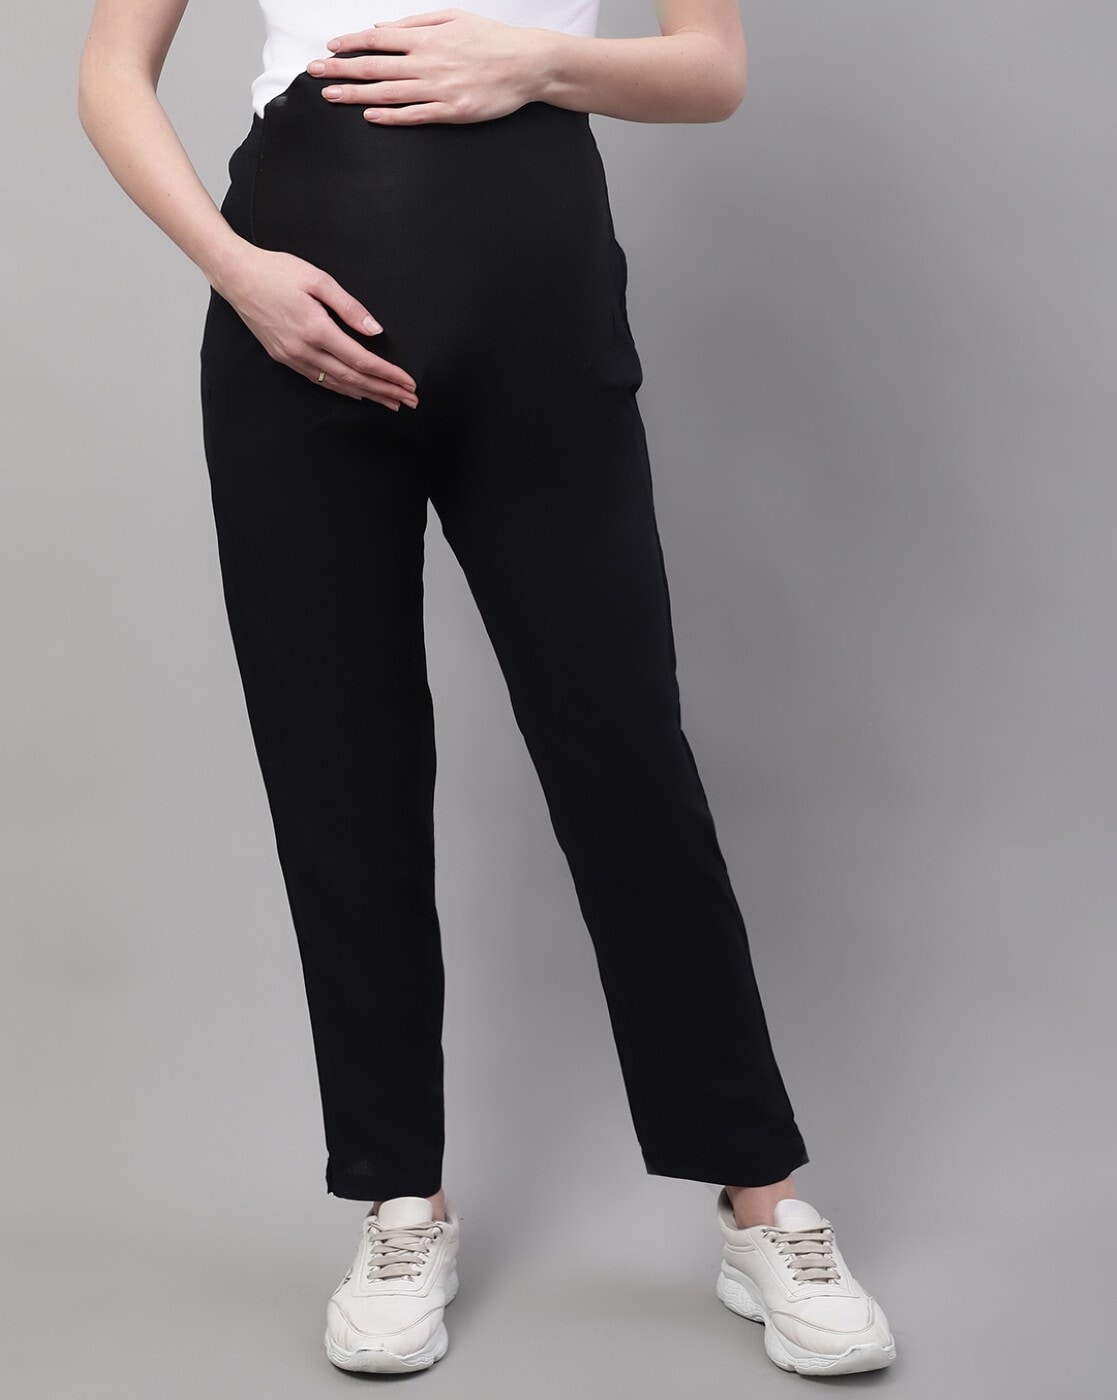 Bhome Maternity Jeans Stretch High Waisted India | Ubuy